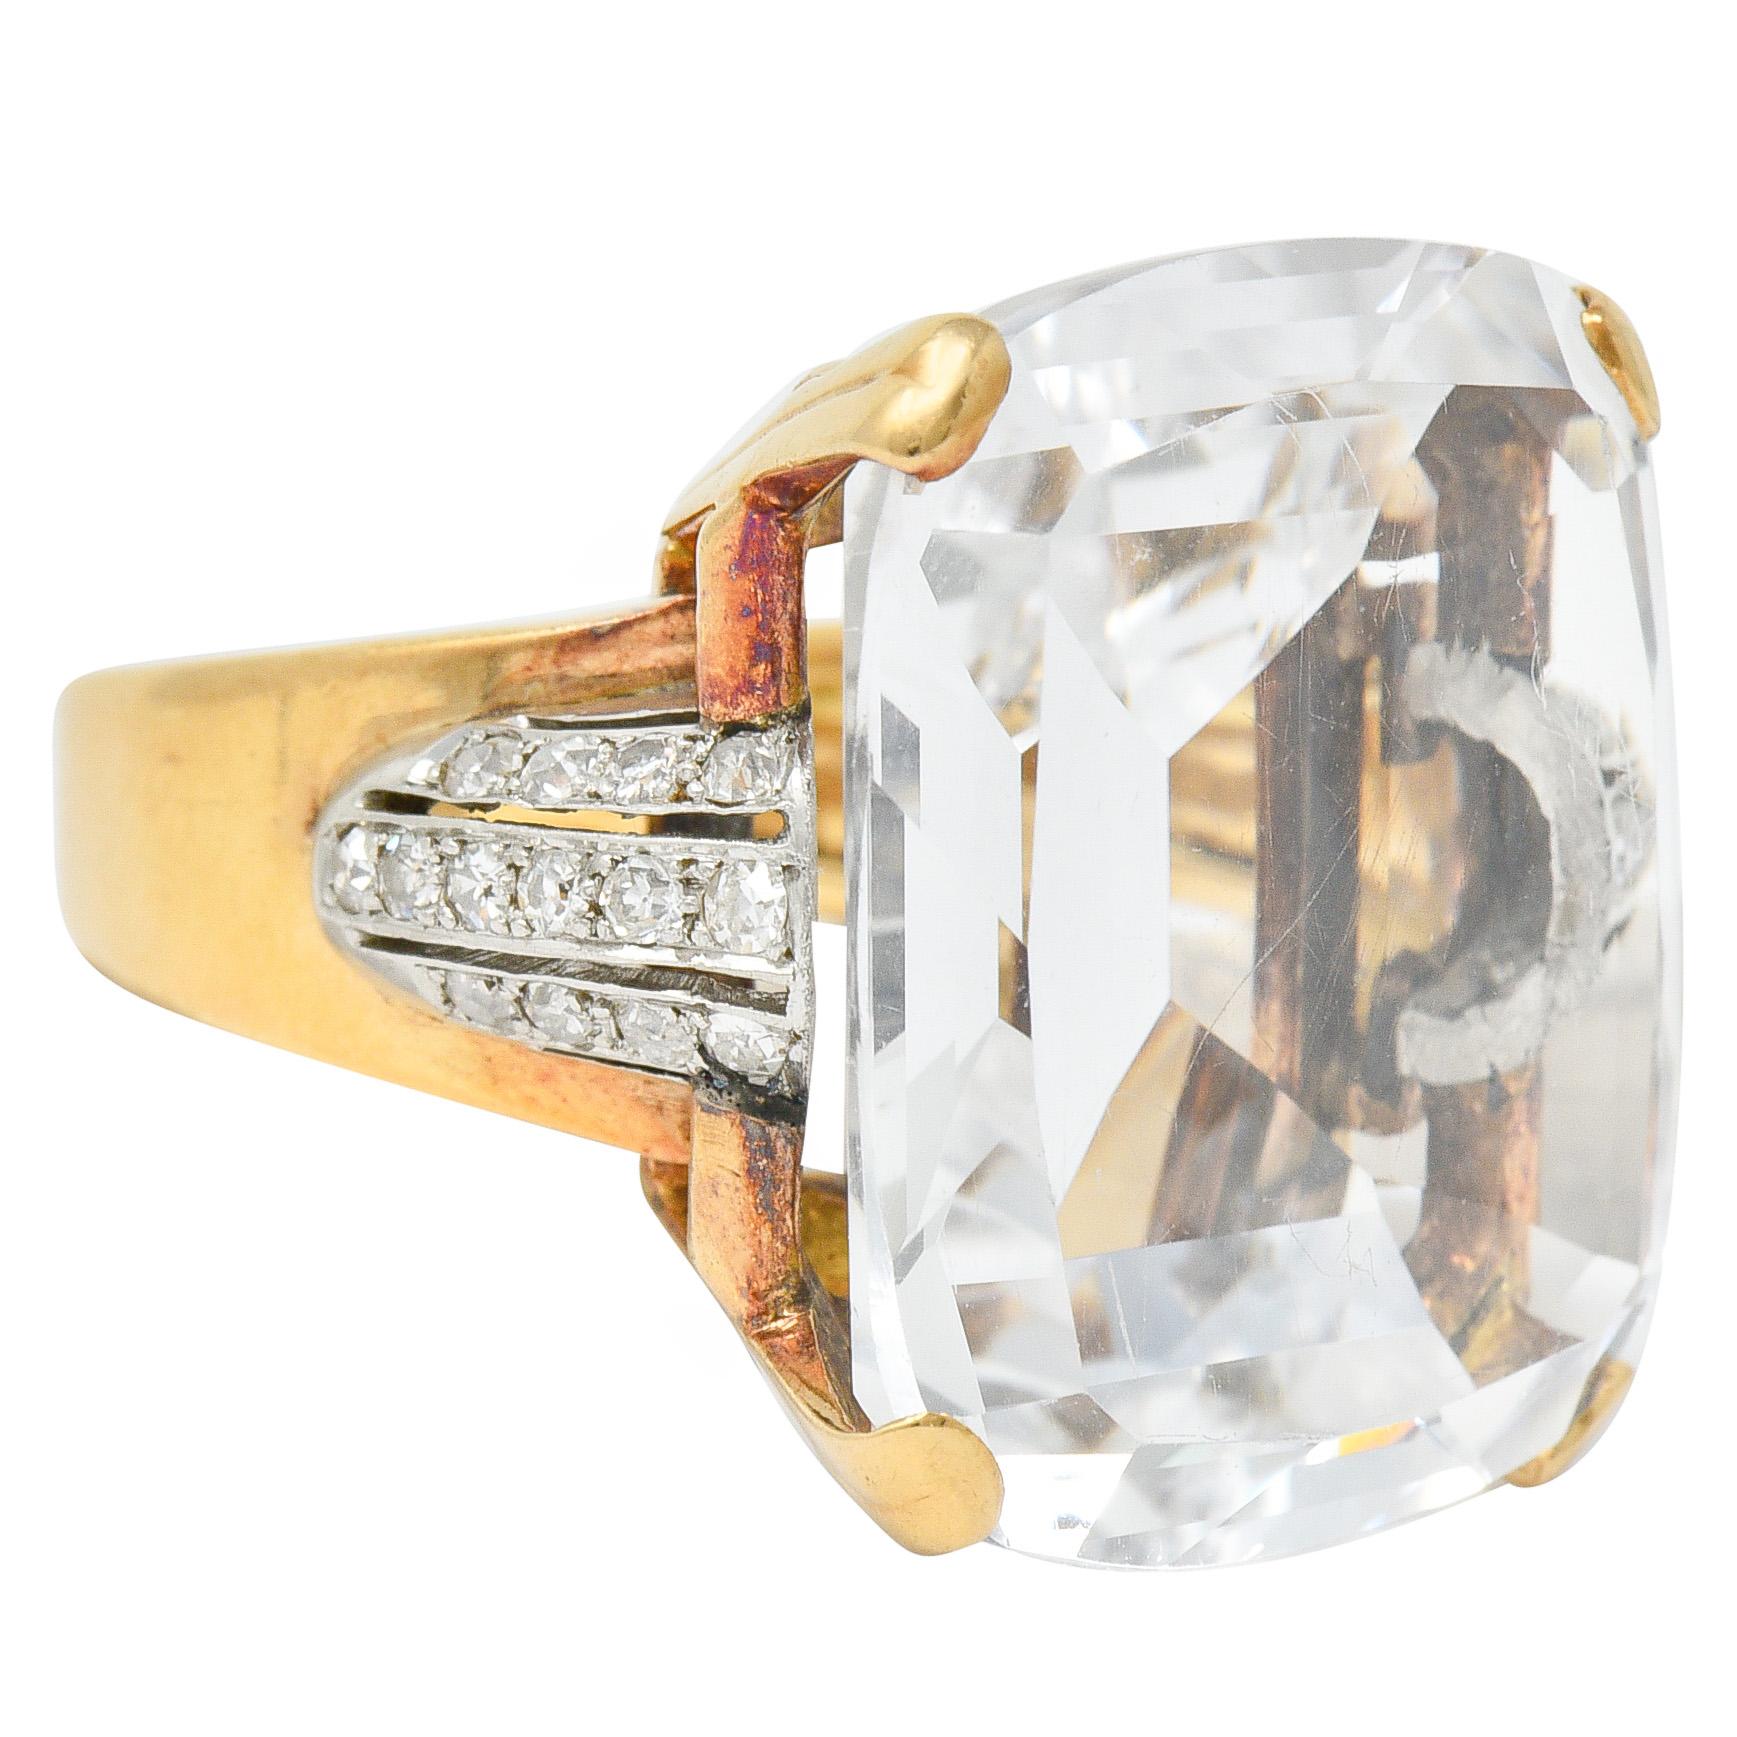 Centering a large rectangular cushion cut rock crystal quartz; transparent and colorless

Basket set and flanked by puffed white gold shoulders bead set with old single cut diamonds

Weighing in total approximately 0.70 carat with G/H color with SI